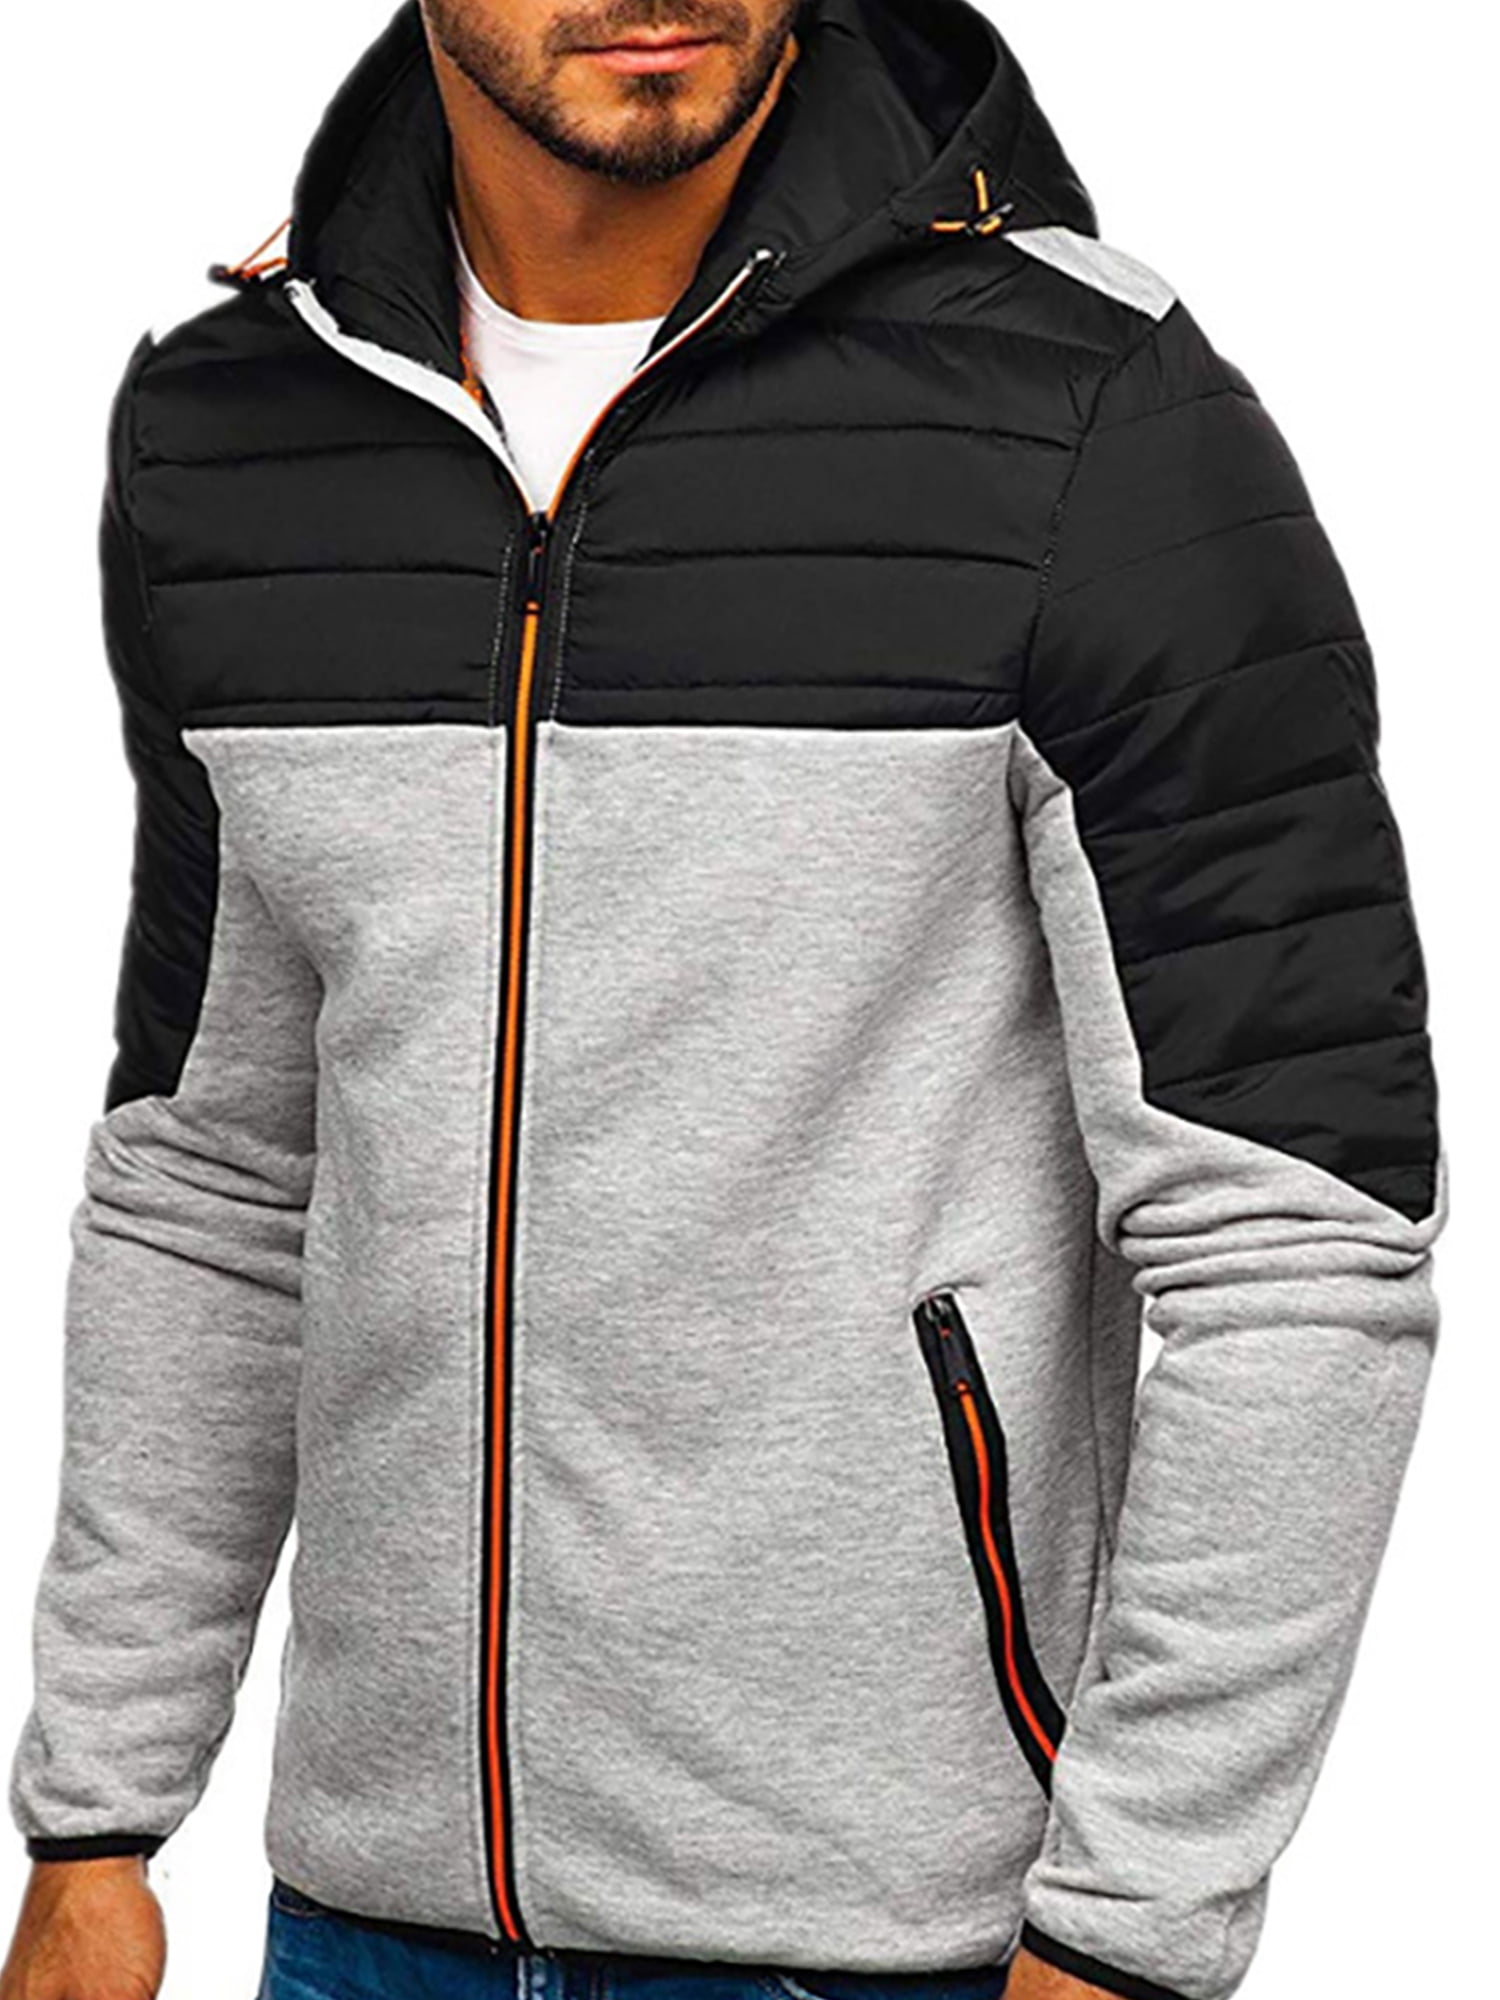 Mens Hoodie Bubble Coats Padded Puffer-Jacket-Winter Warm Quilted Zip Up Outwear